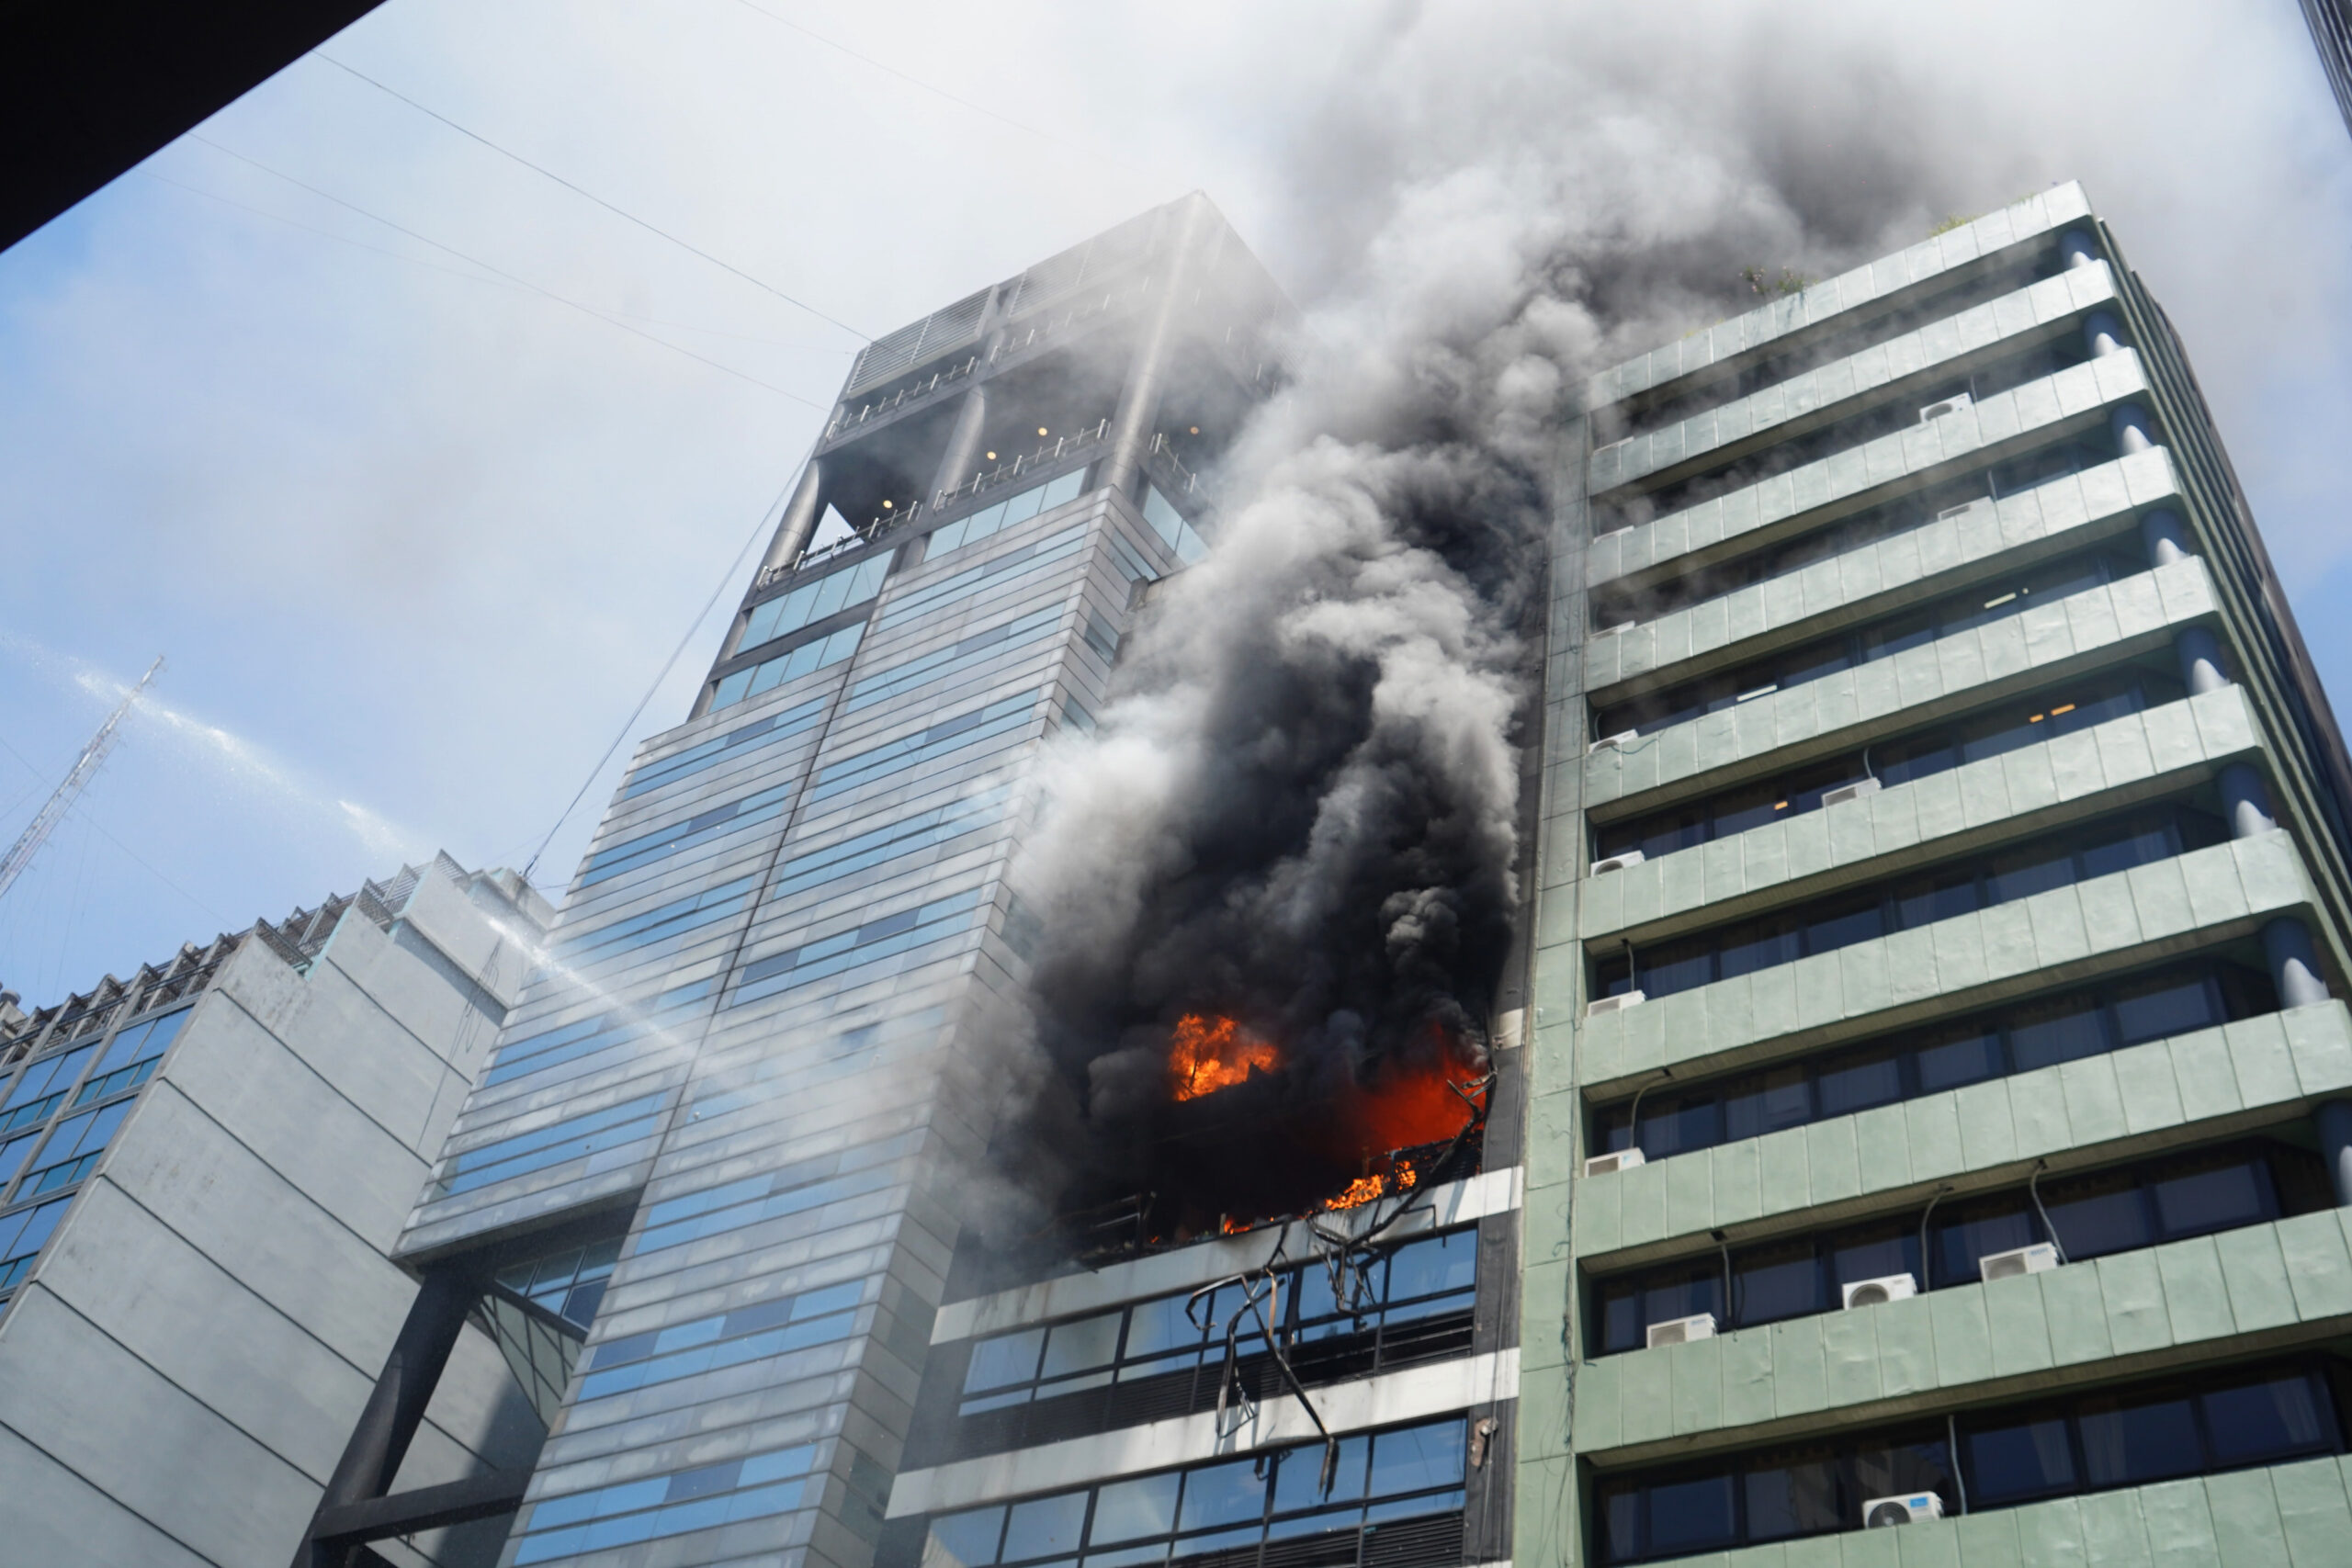 Large fire breaks out at building next to Labor Ministry on Avenida Alem